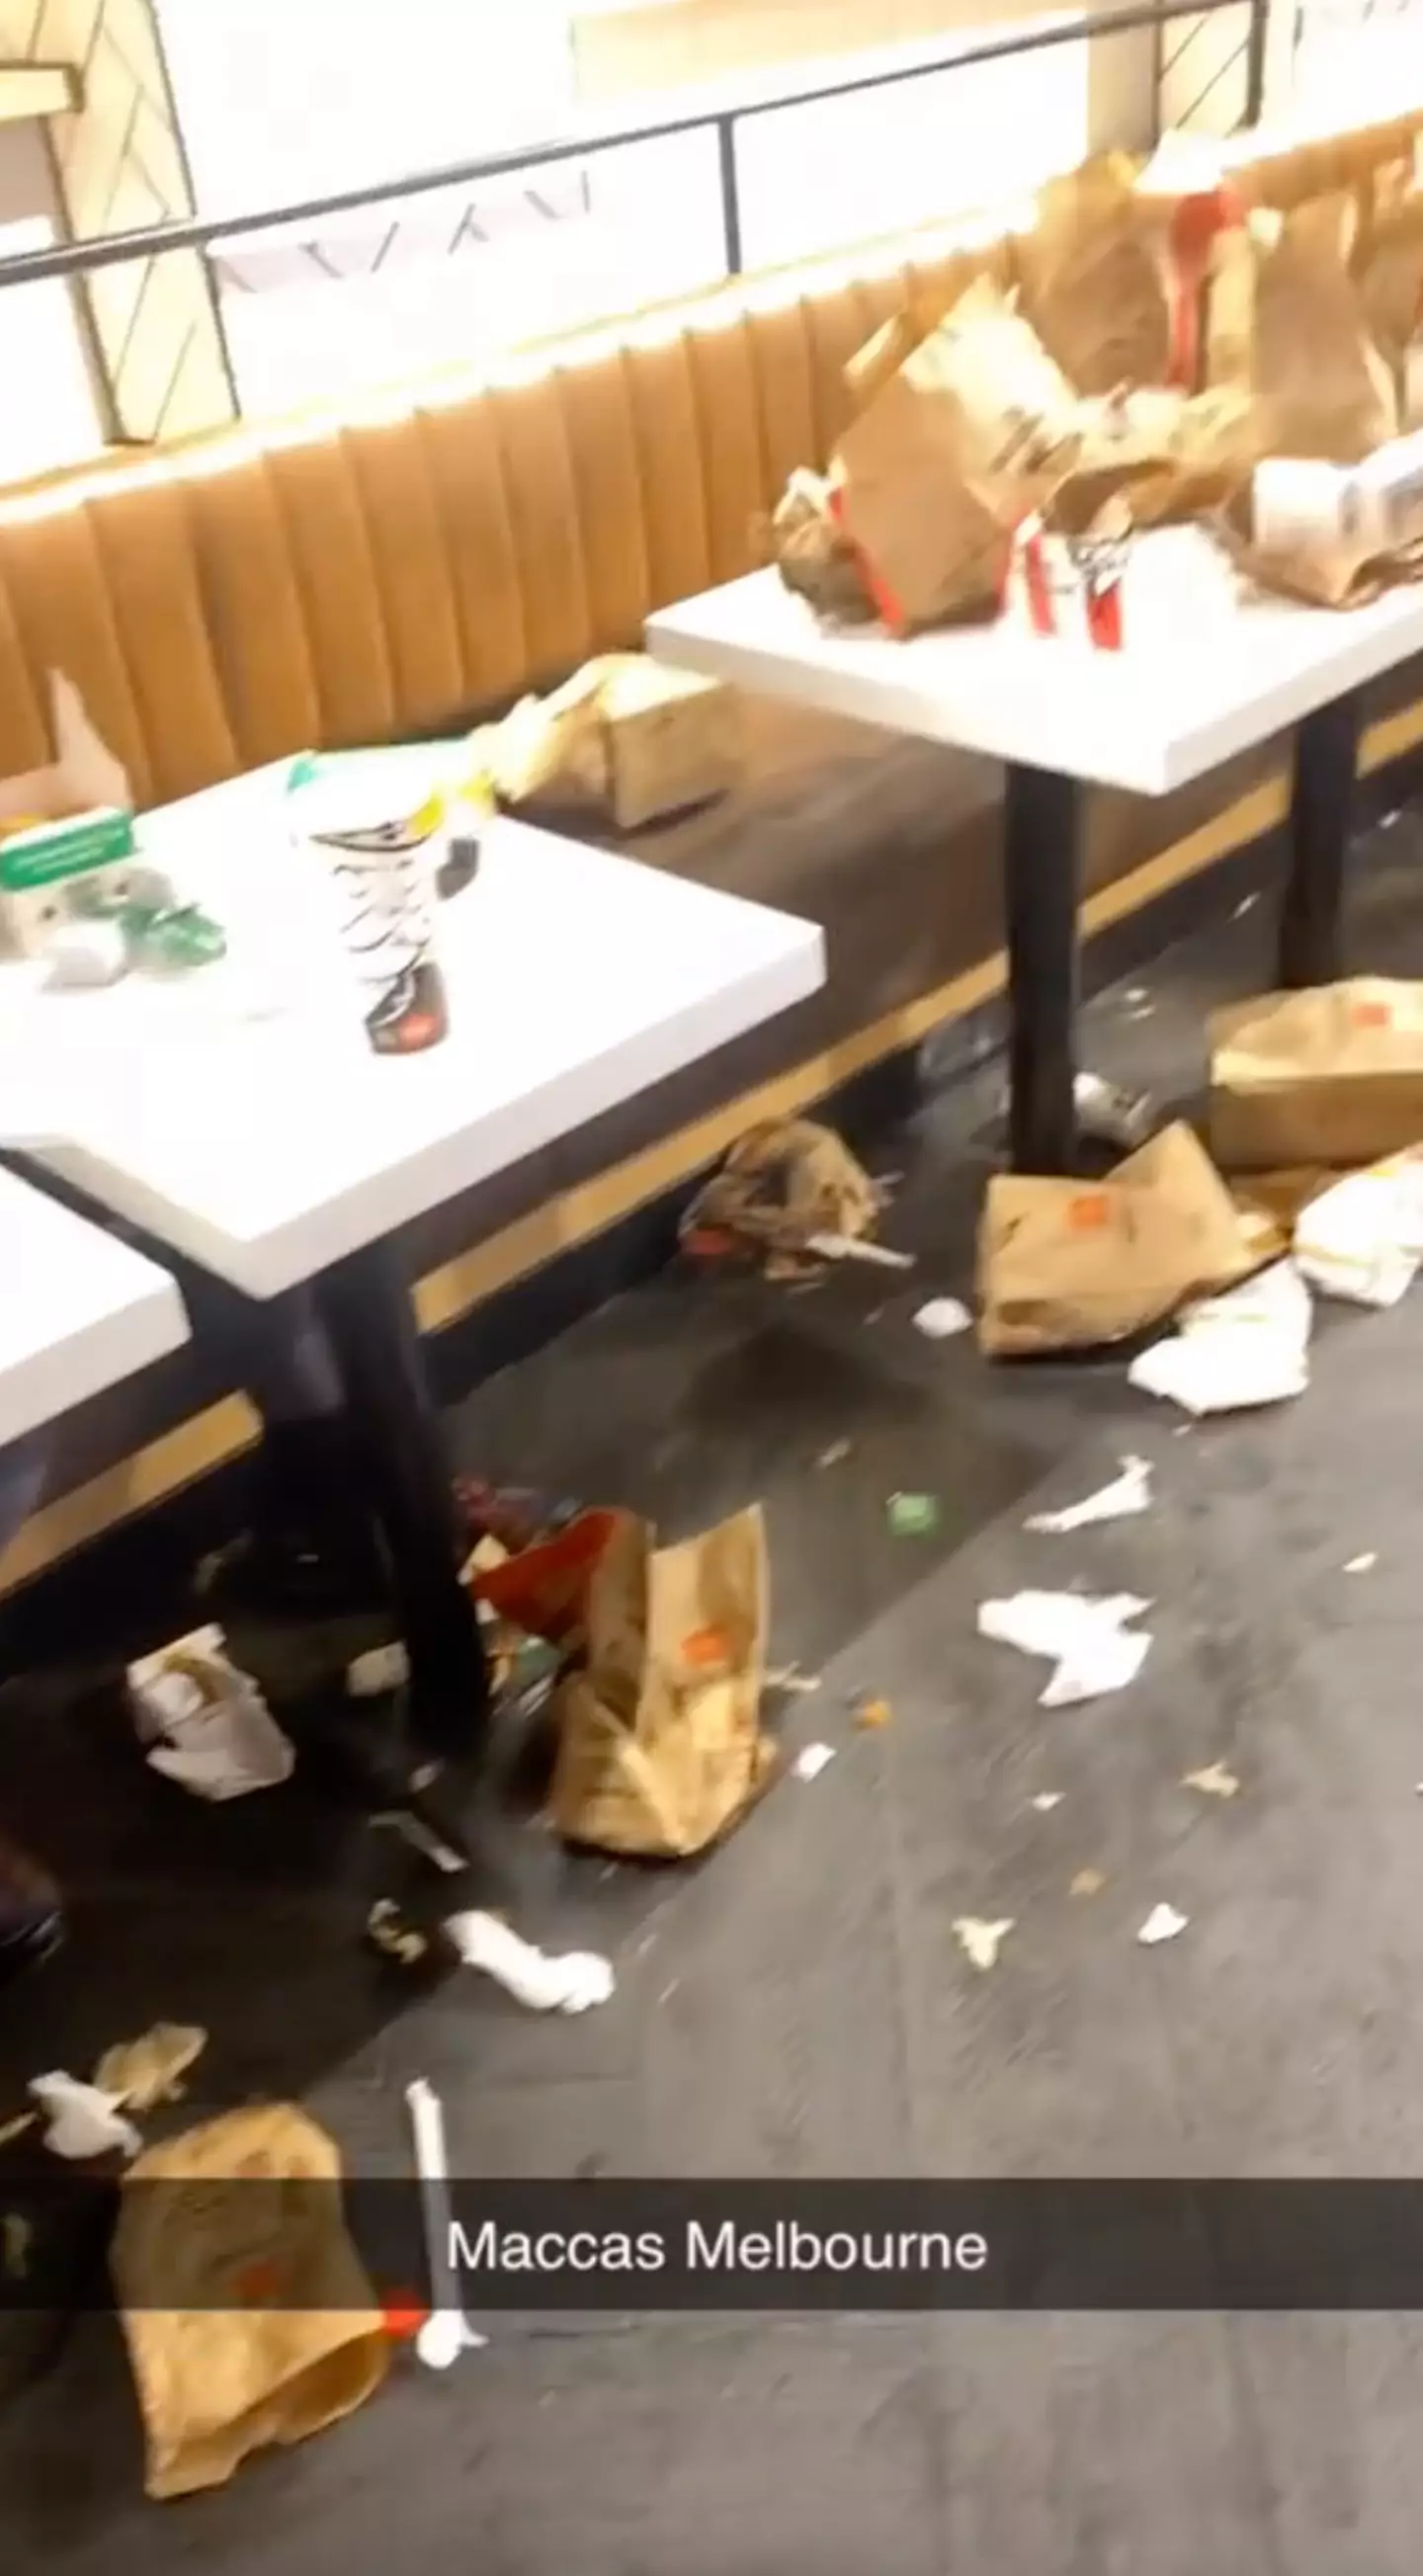 Food scraps and trash are everywhere - even a KFC makes a surprise appearance.